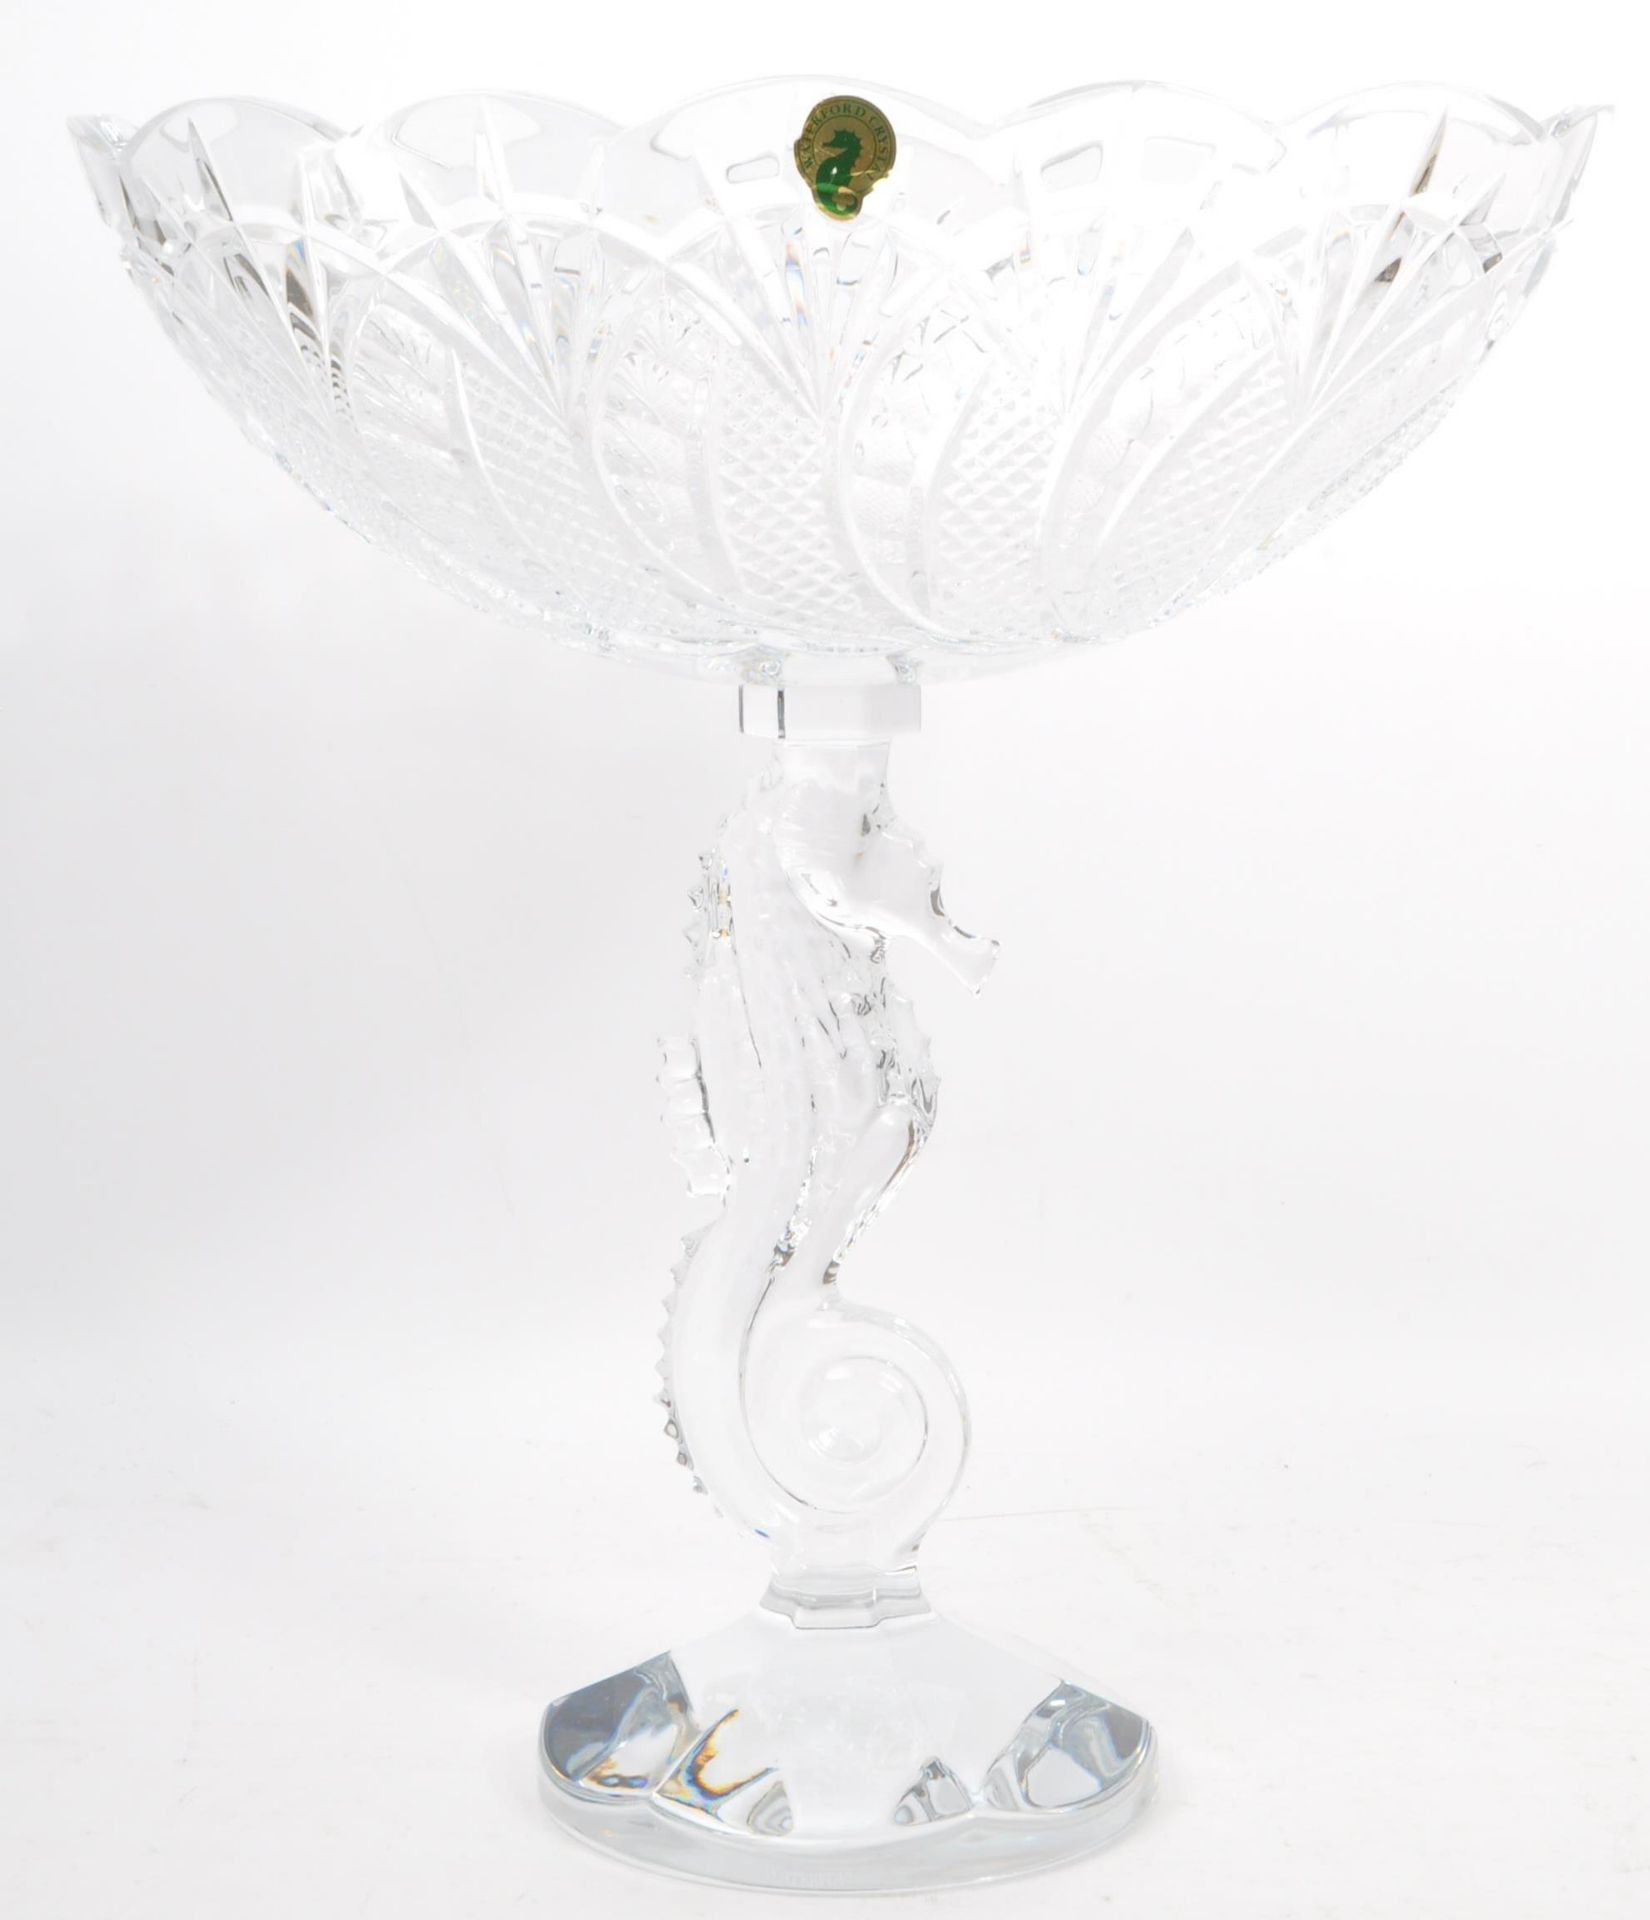 WATERFORD CRYSTAL GLASS - SEAHORSE TAZZA CENTREPIECE NOS - Image 4 of 7